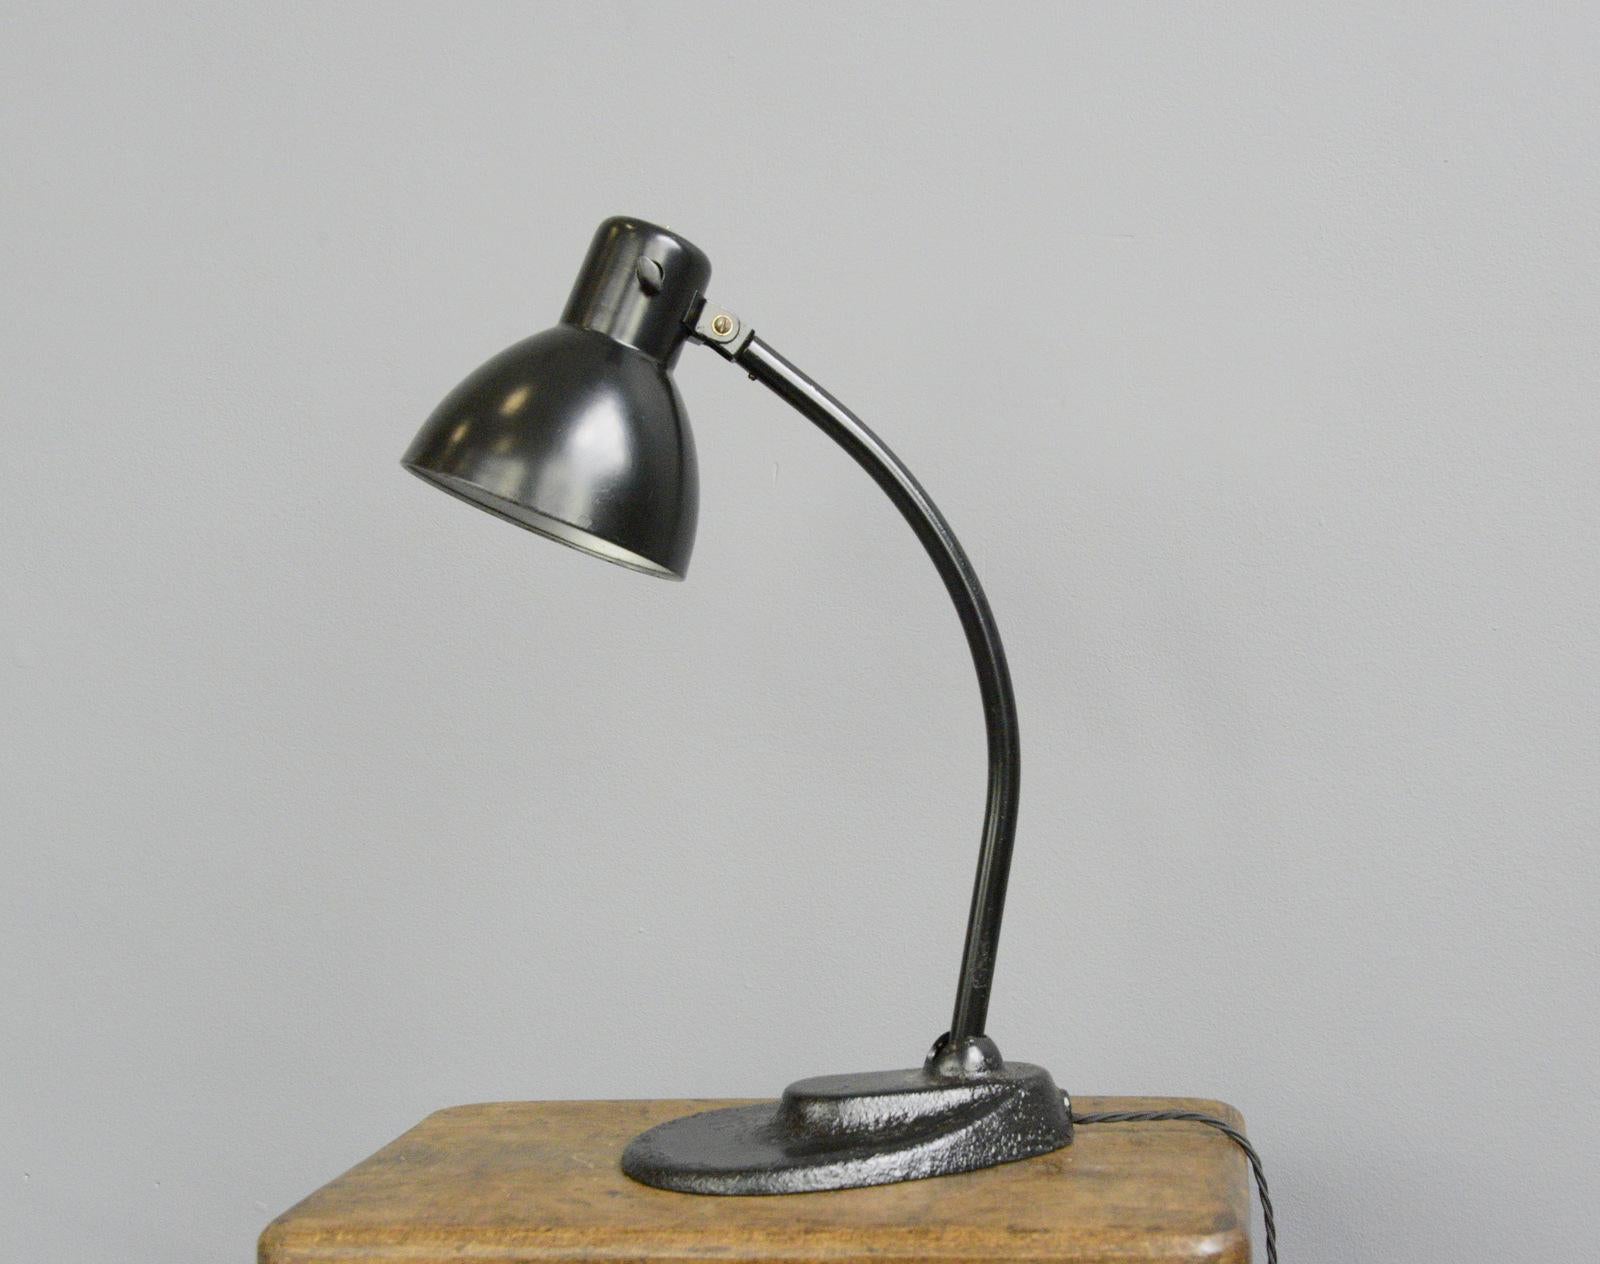 Kandem Model 967 by Hin Bredendieck, circa 1920s

- Cast iron base
- Adjustable curved steel arm
- Steel shade 
- Original toggle On/Off switch 
- Designed by Hin Bredendieck
- Produced by Korting & Mathiesen, Leipzig
- German, 1920s
-